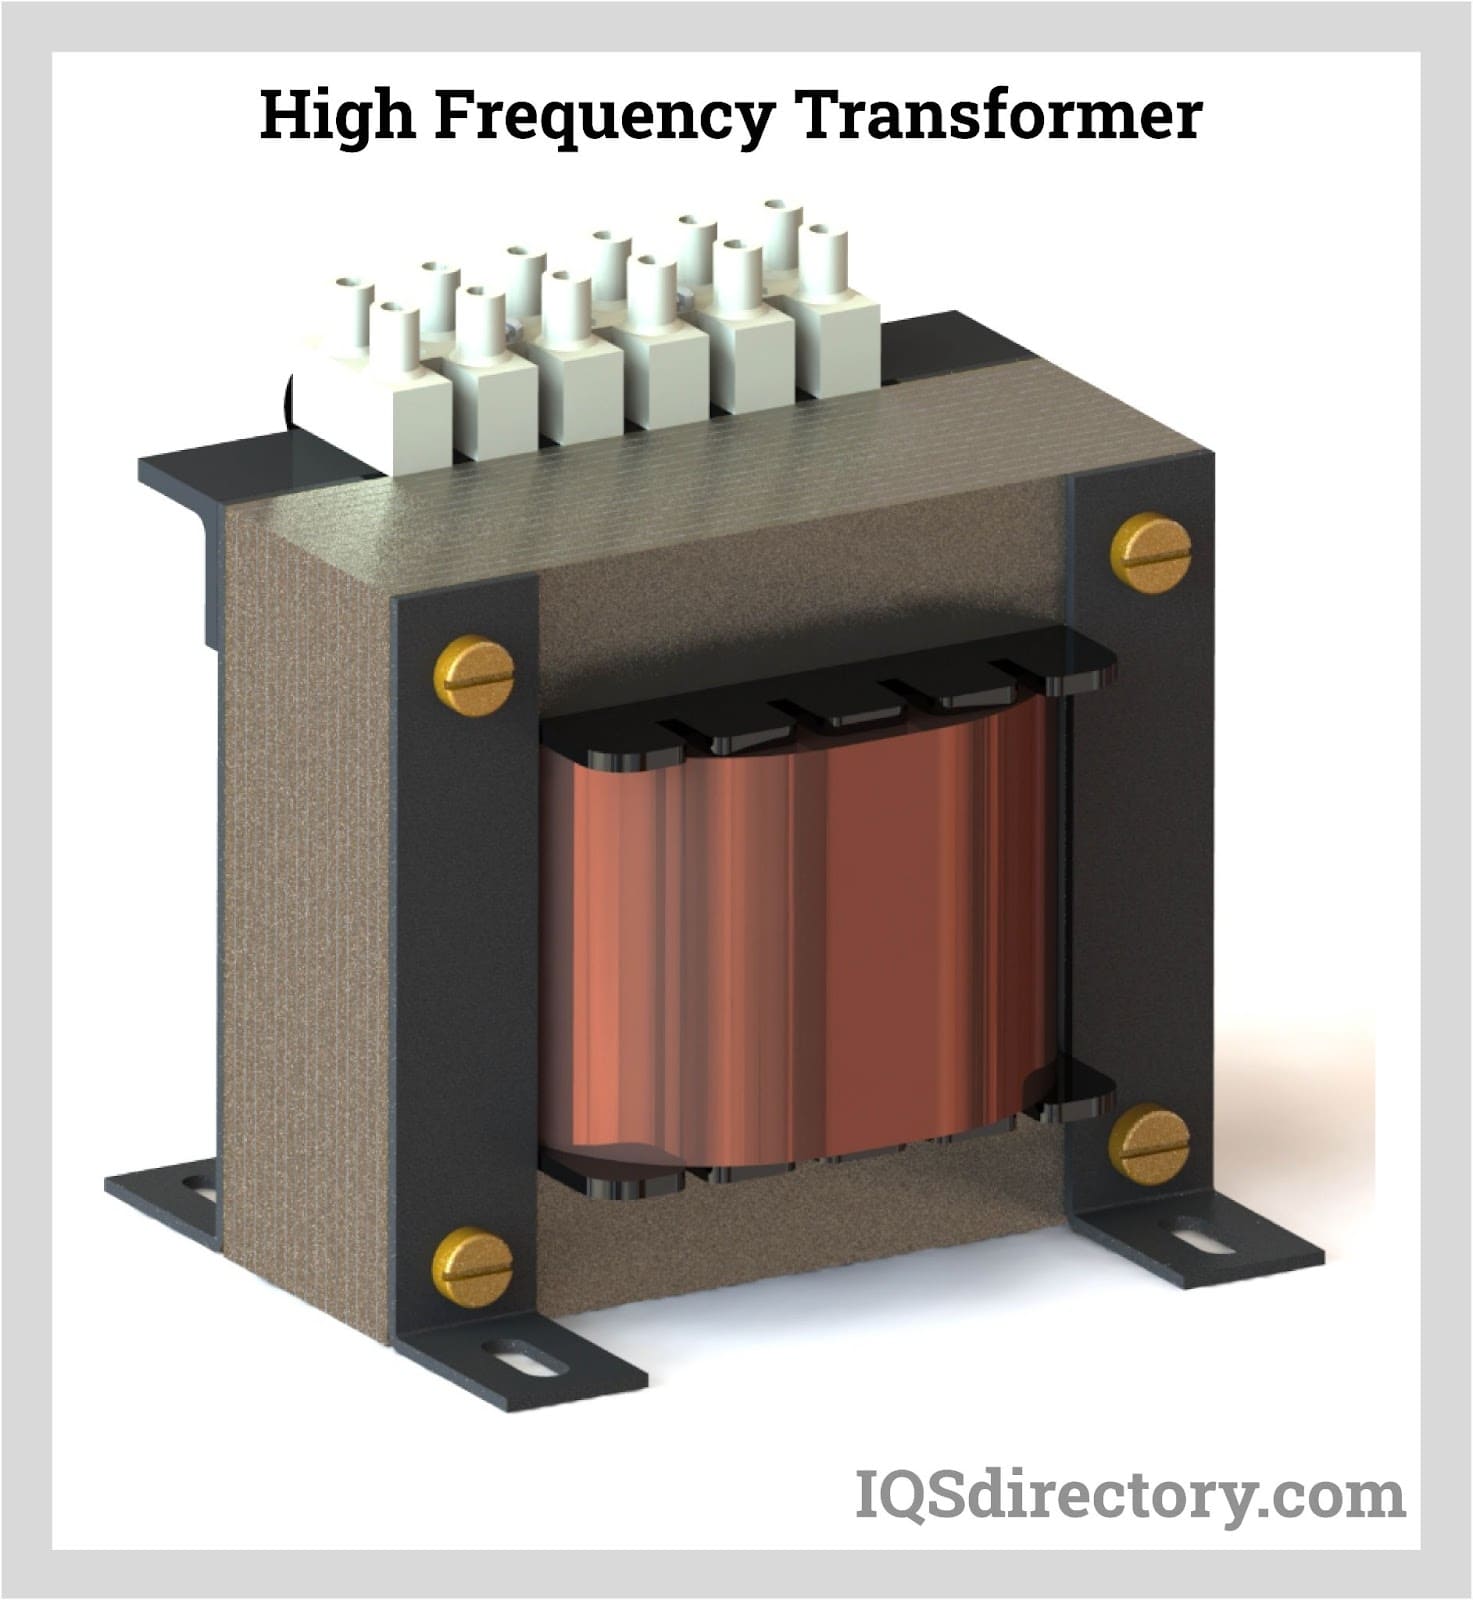 https://www.iqsdirectory.com/articles/power-supply/high-voltage-power-supplies/high-frequency-transformer.jpg